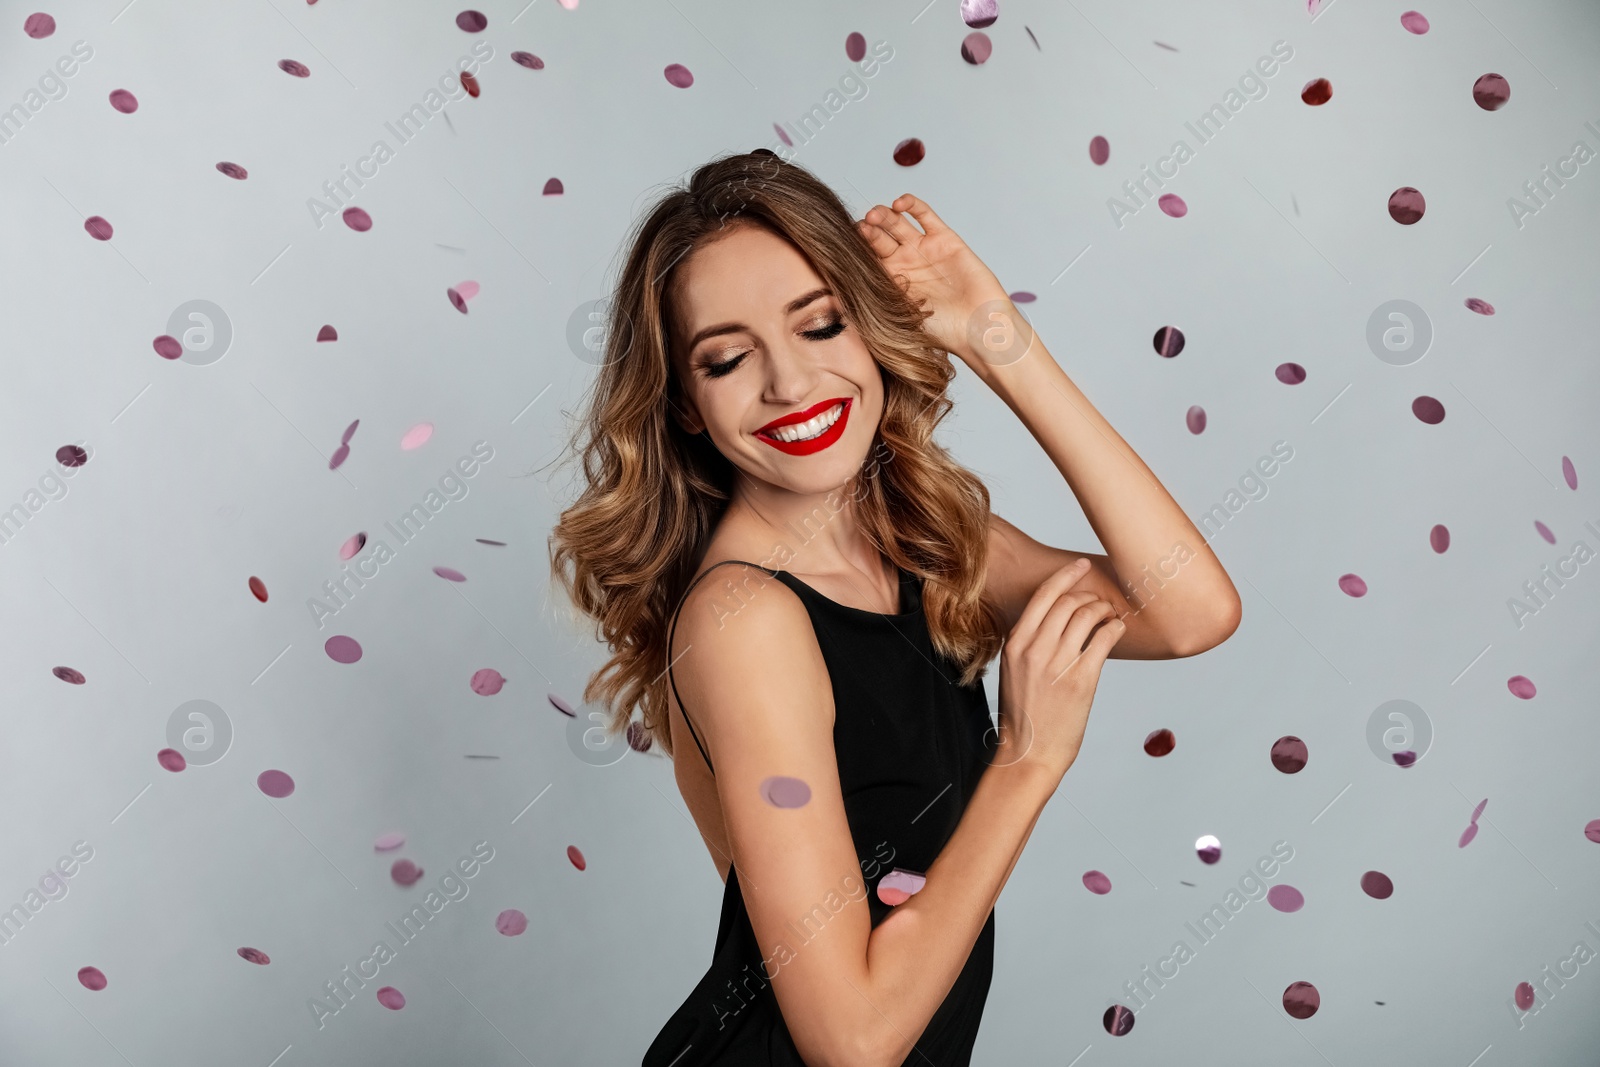 Photo of Happy young woman and confetti on grey background. Christmas celebration